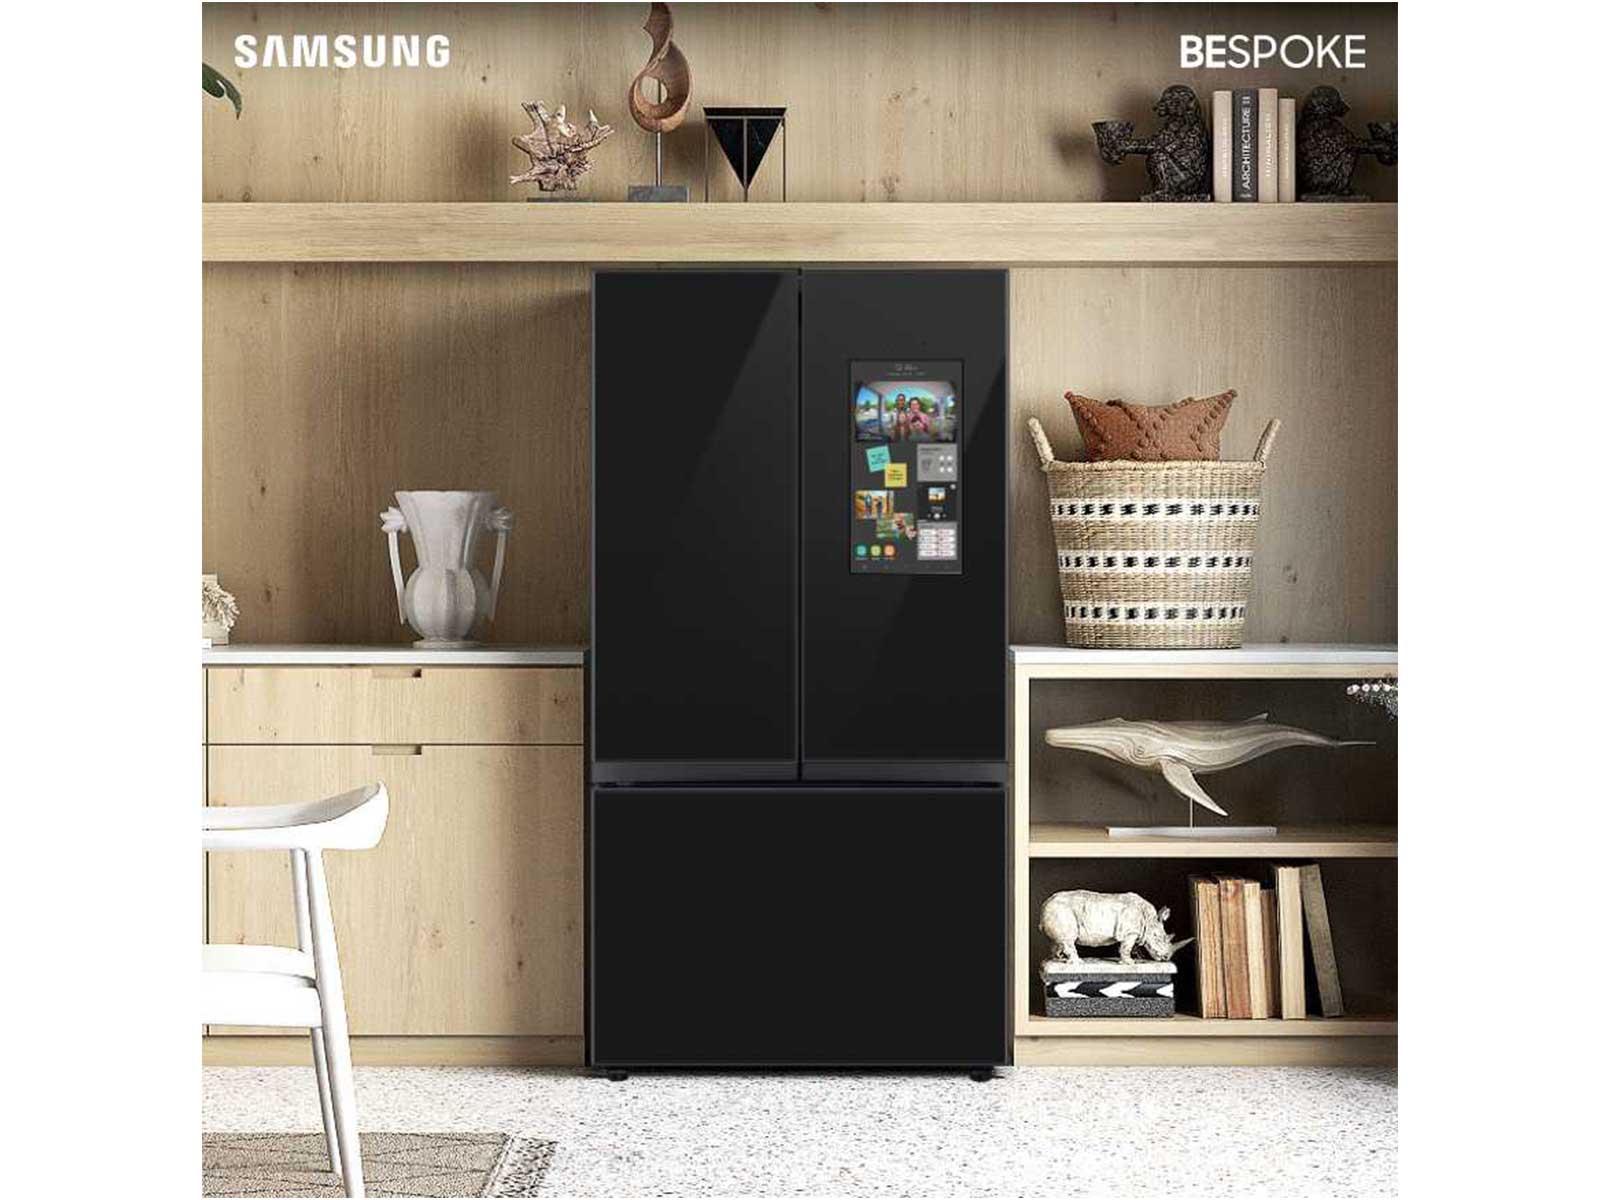 Bespoke 3-Door French Door Refrigerator (24 cu. ft.) &ndash; with Family Hub&trade; Panel in Charcoal Glass &ndash; (with Customizable Door Panel Colors) in Charcoal Glass